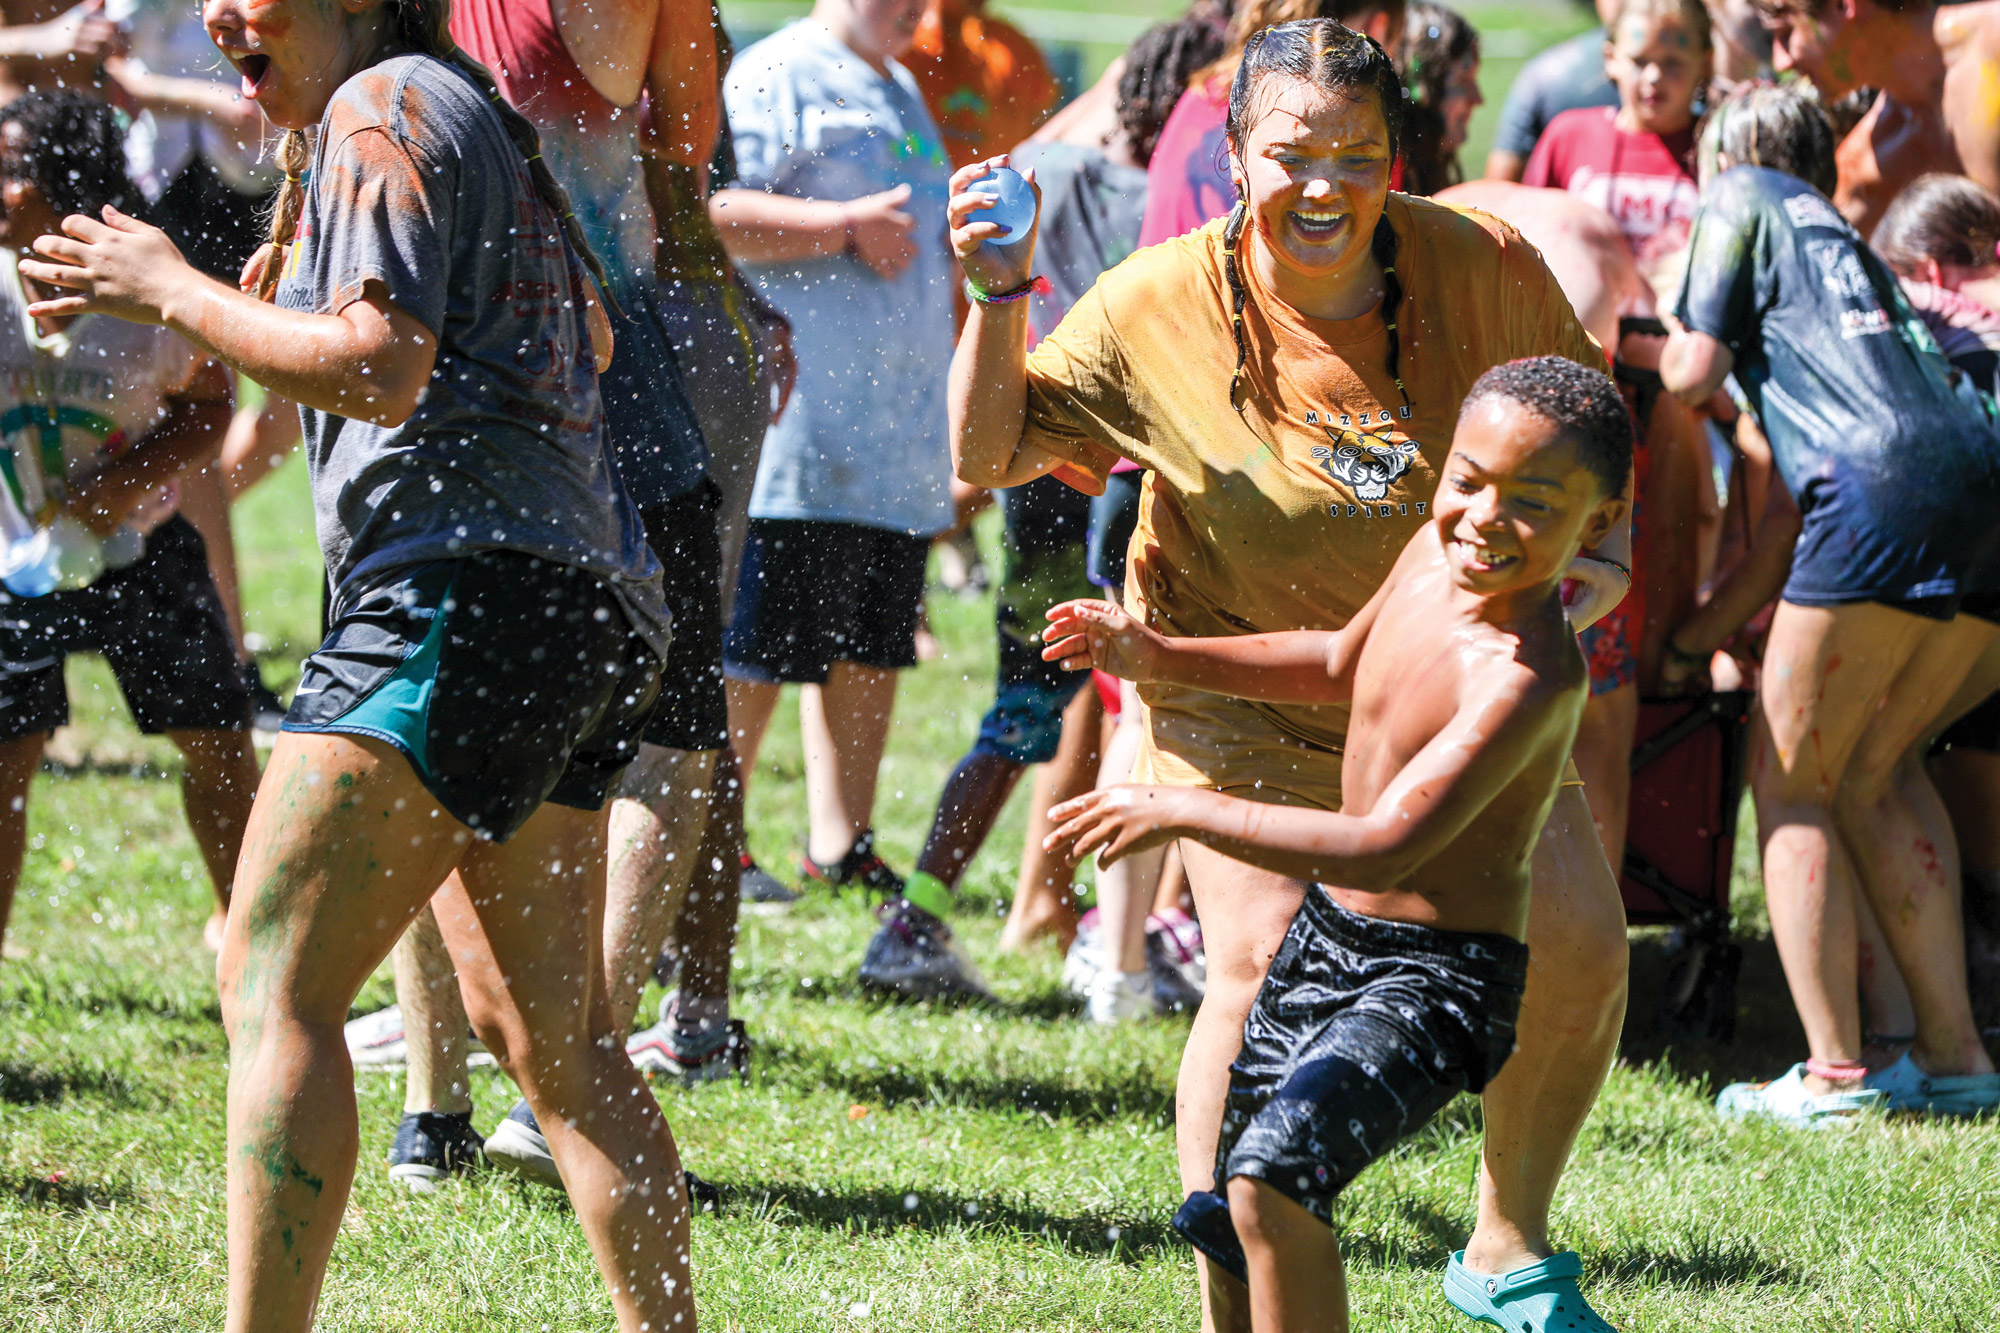 MU students and campers in a water balloon fight